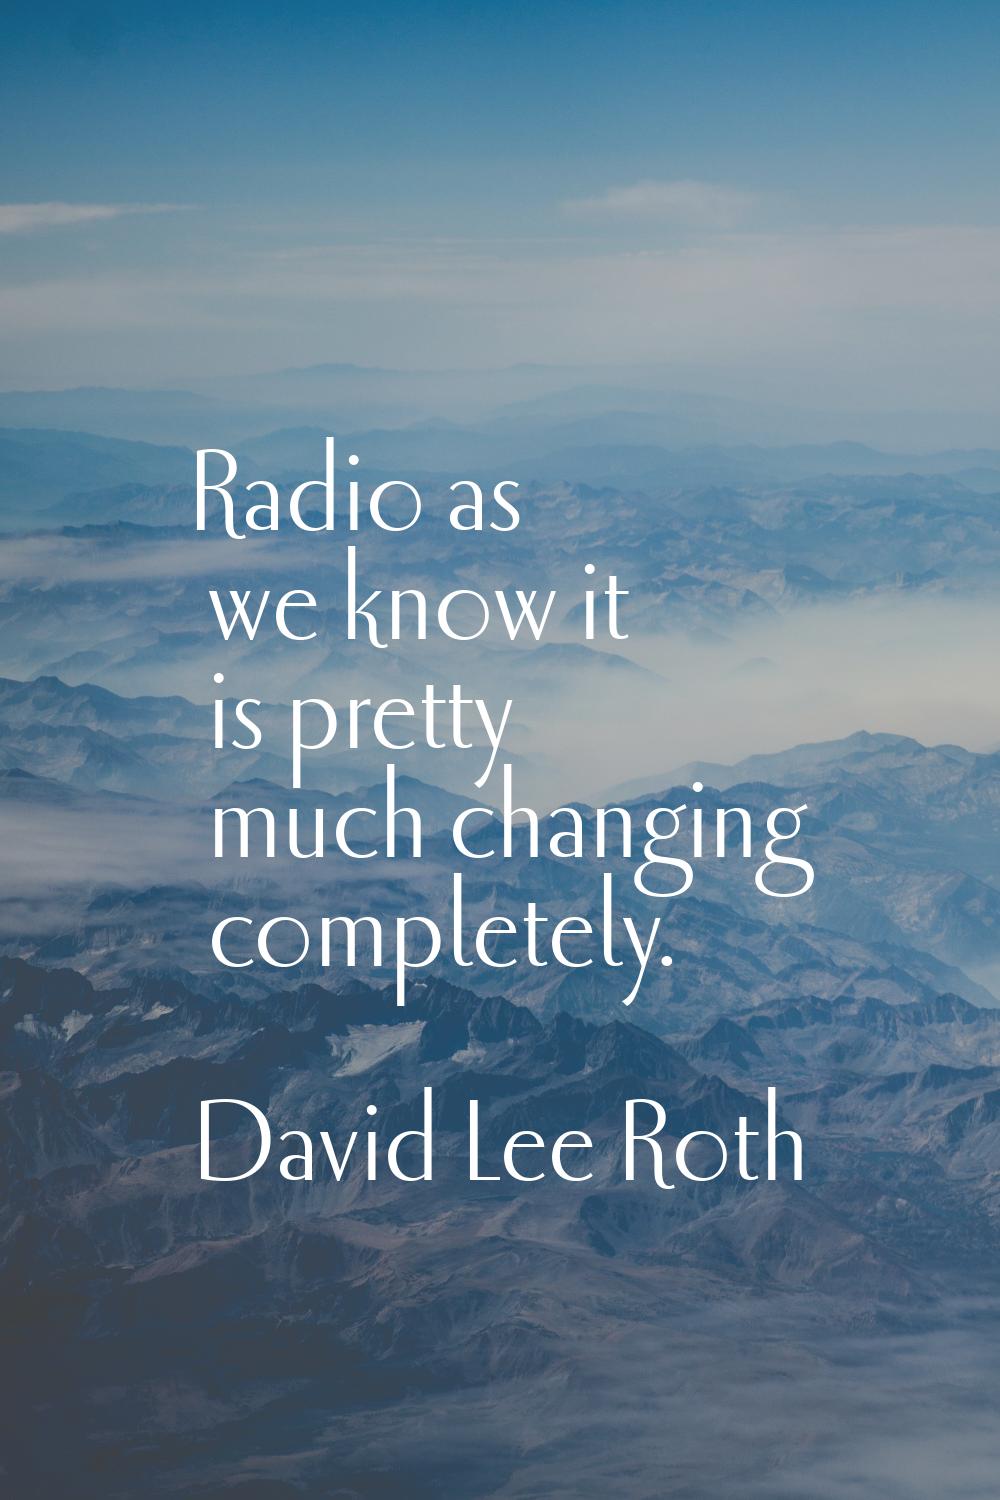 Radio as we know it is pretty much changing completely.